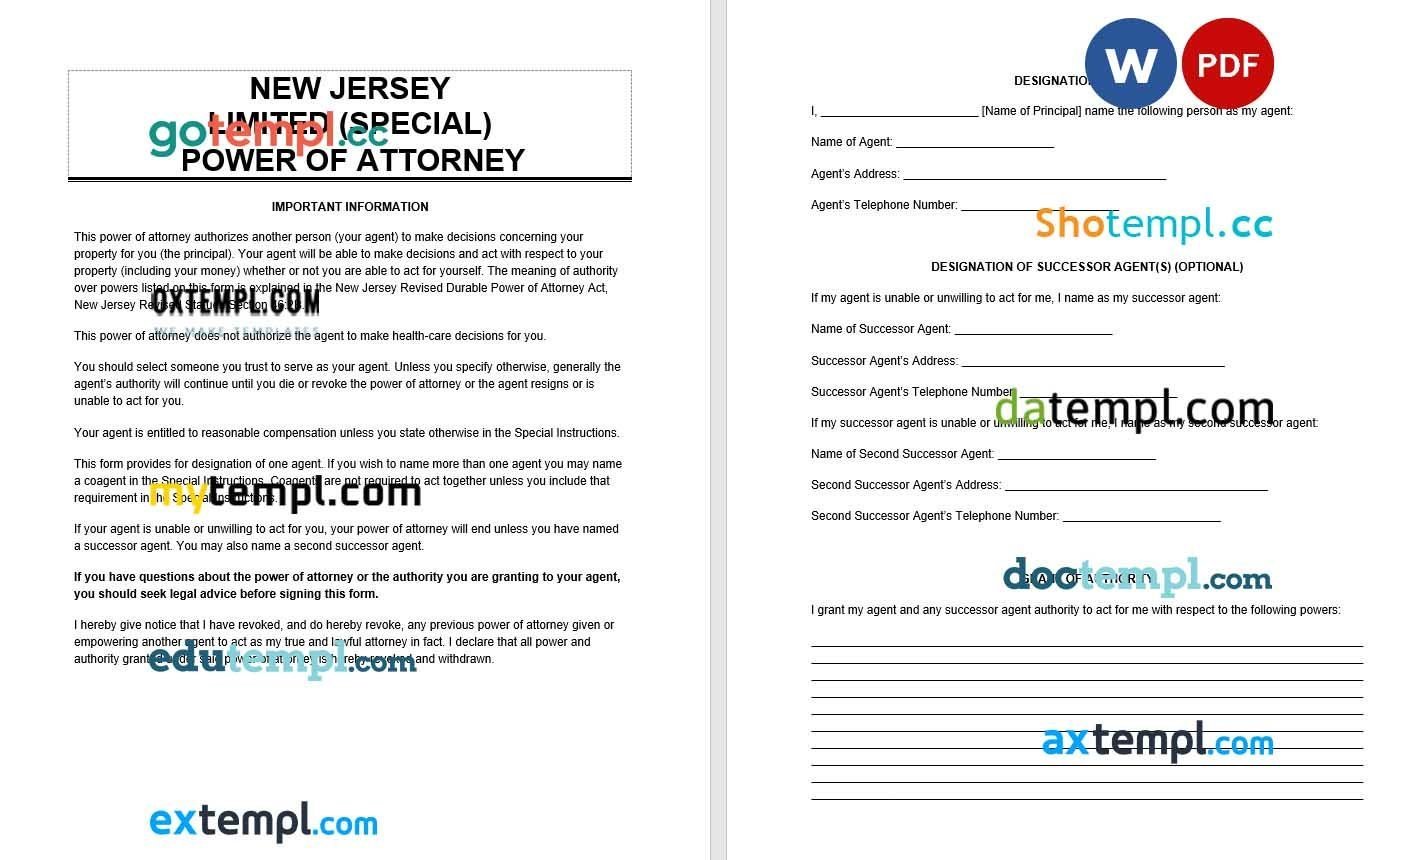 New Jersey Limited Power of Attorney example, fully editable